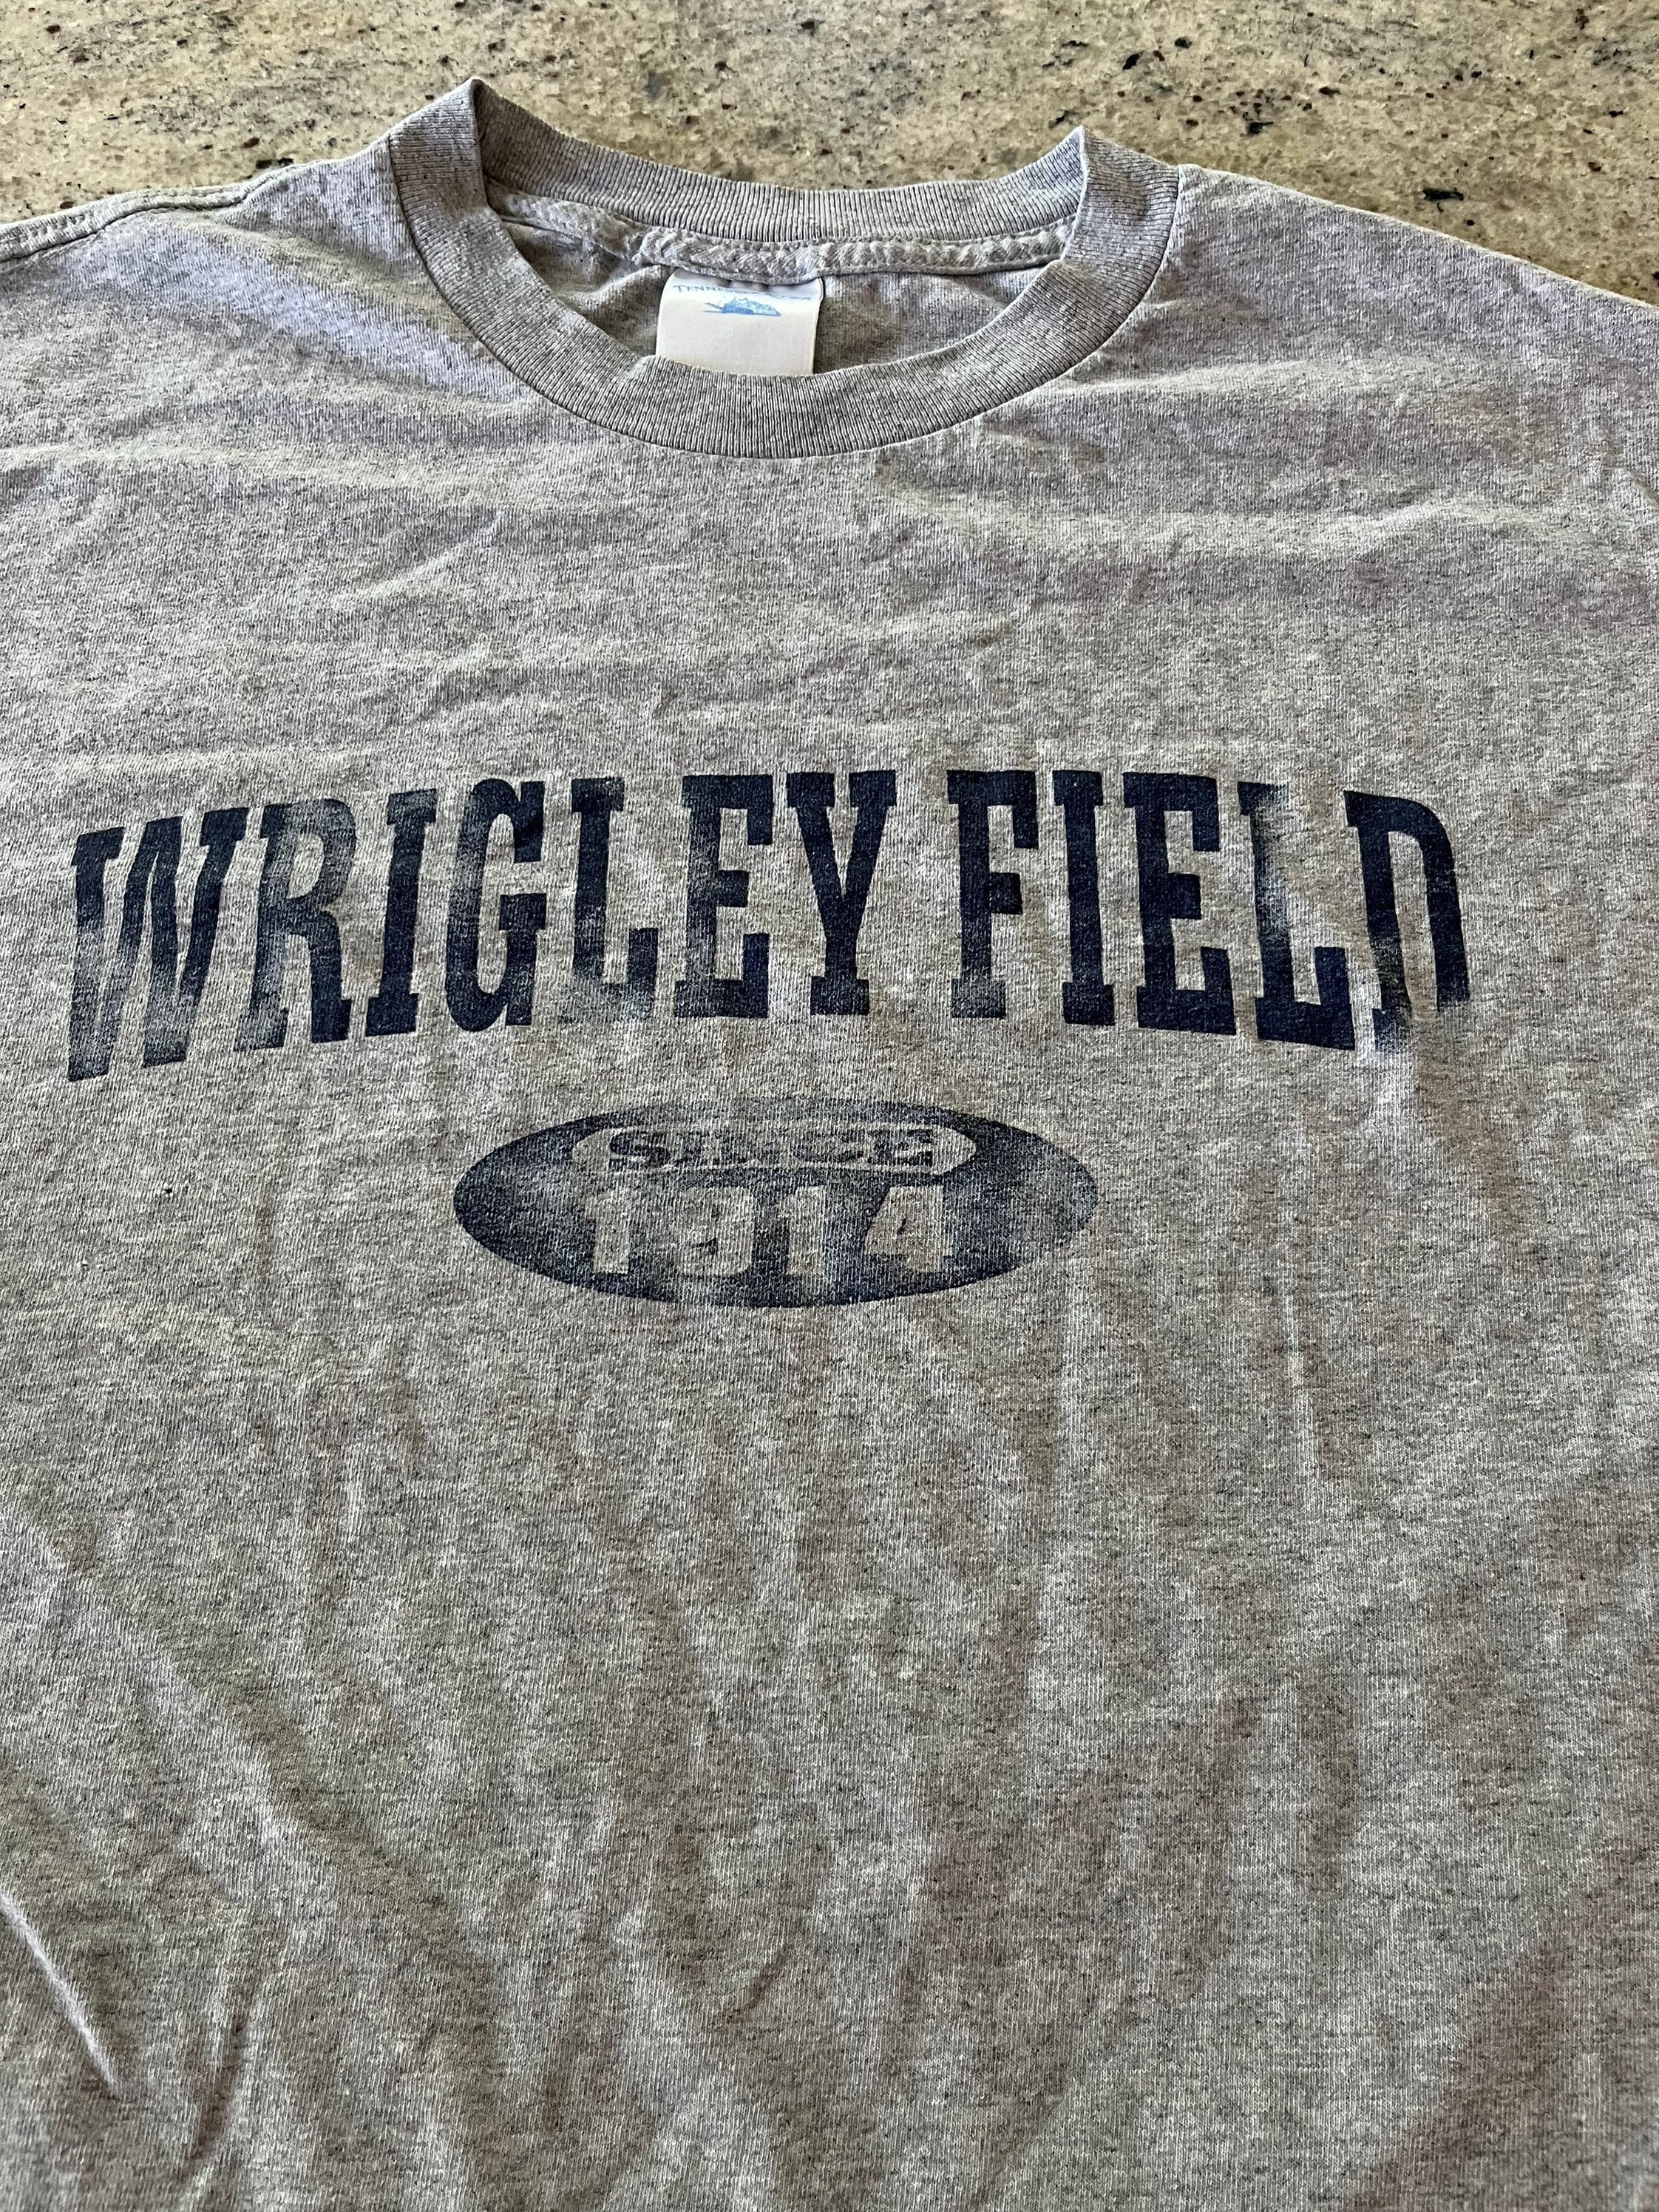 Vintage317Indy Vintage Wrigley Field 1914 T Shirt Size XL But May Fit Like Large or Medium Perfect Fade